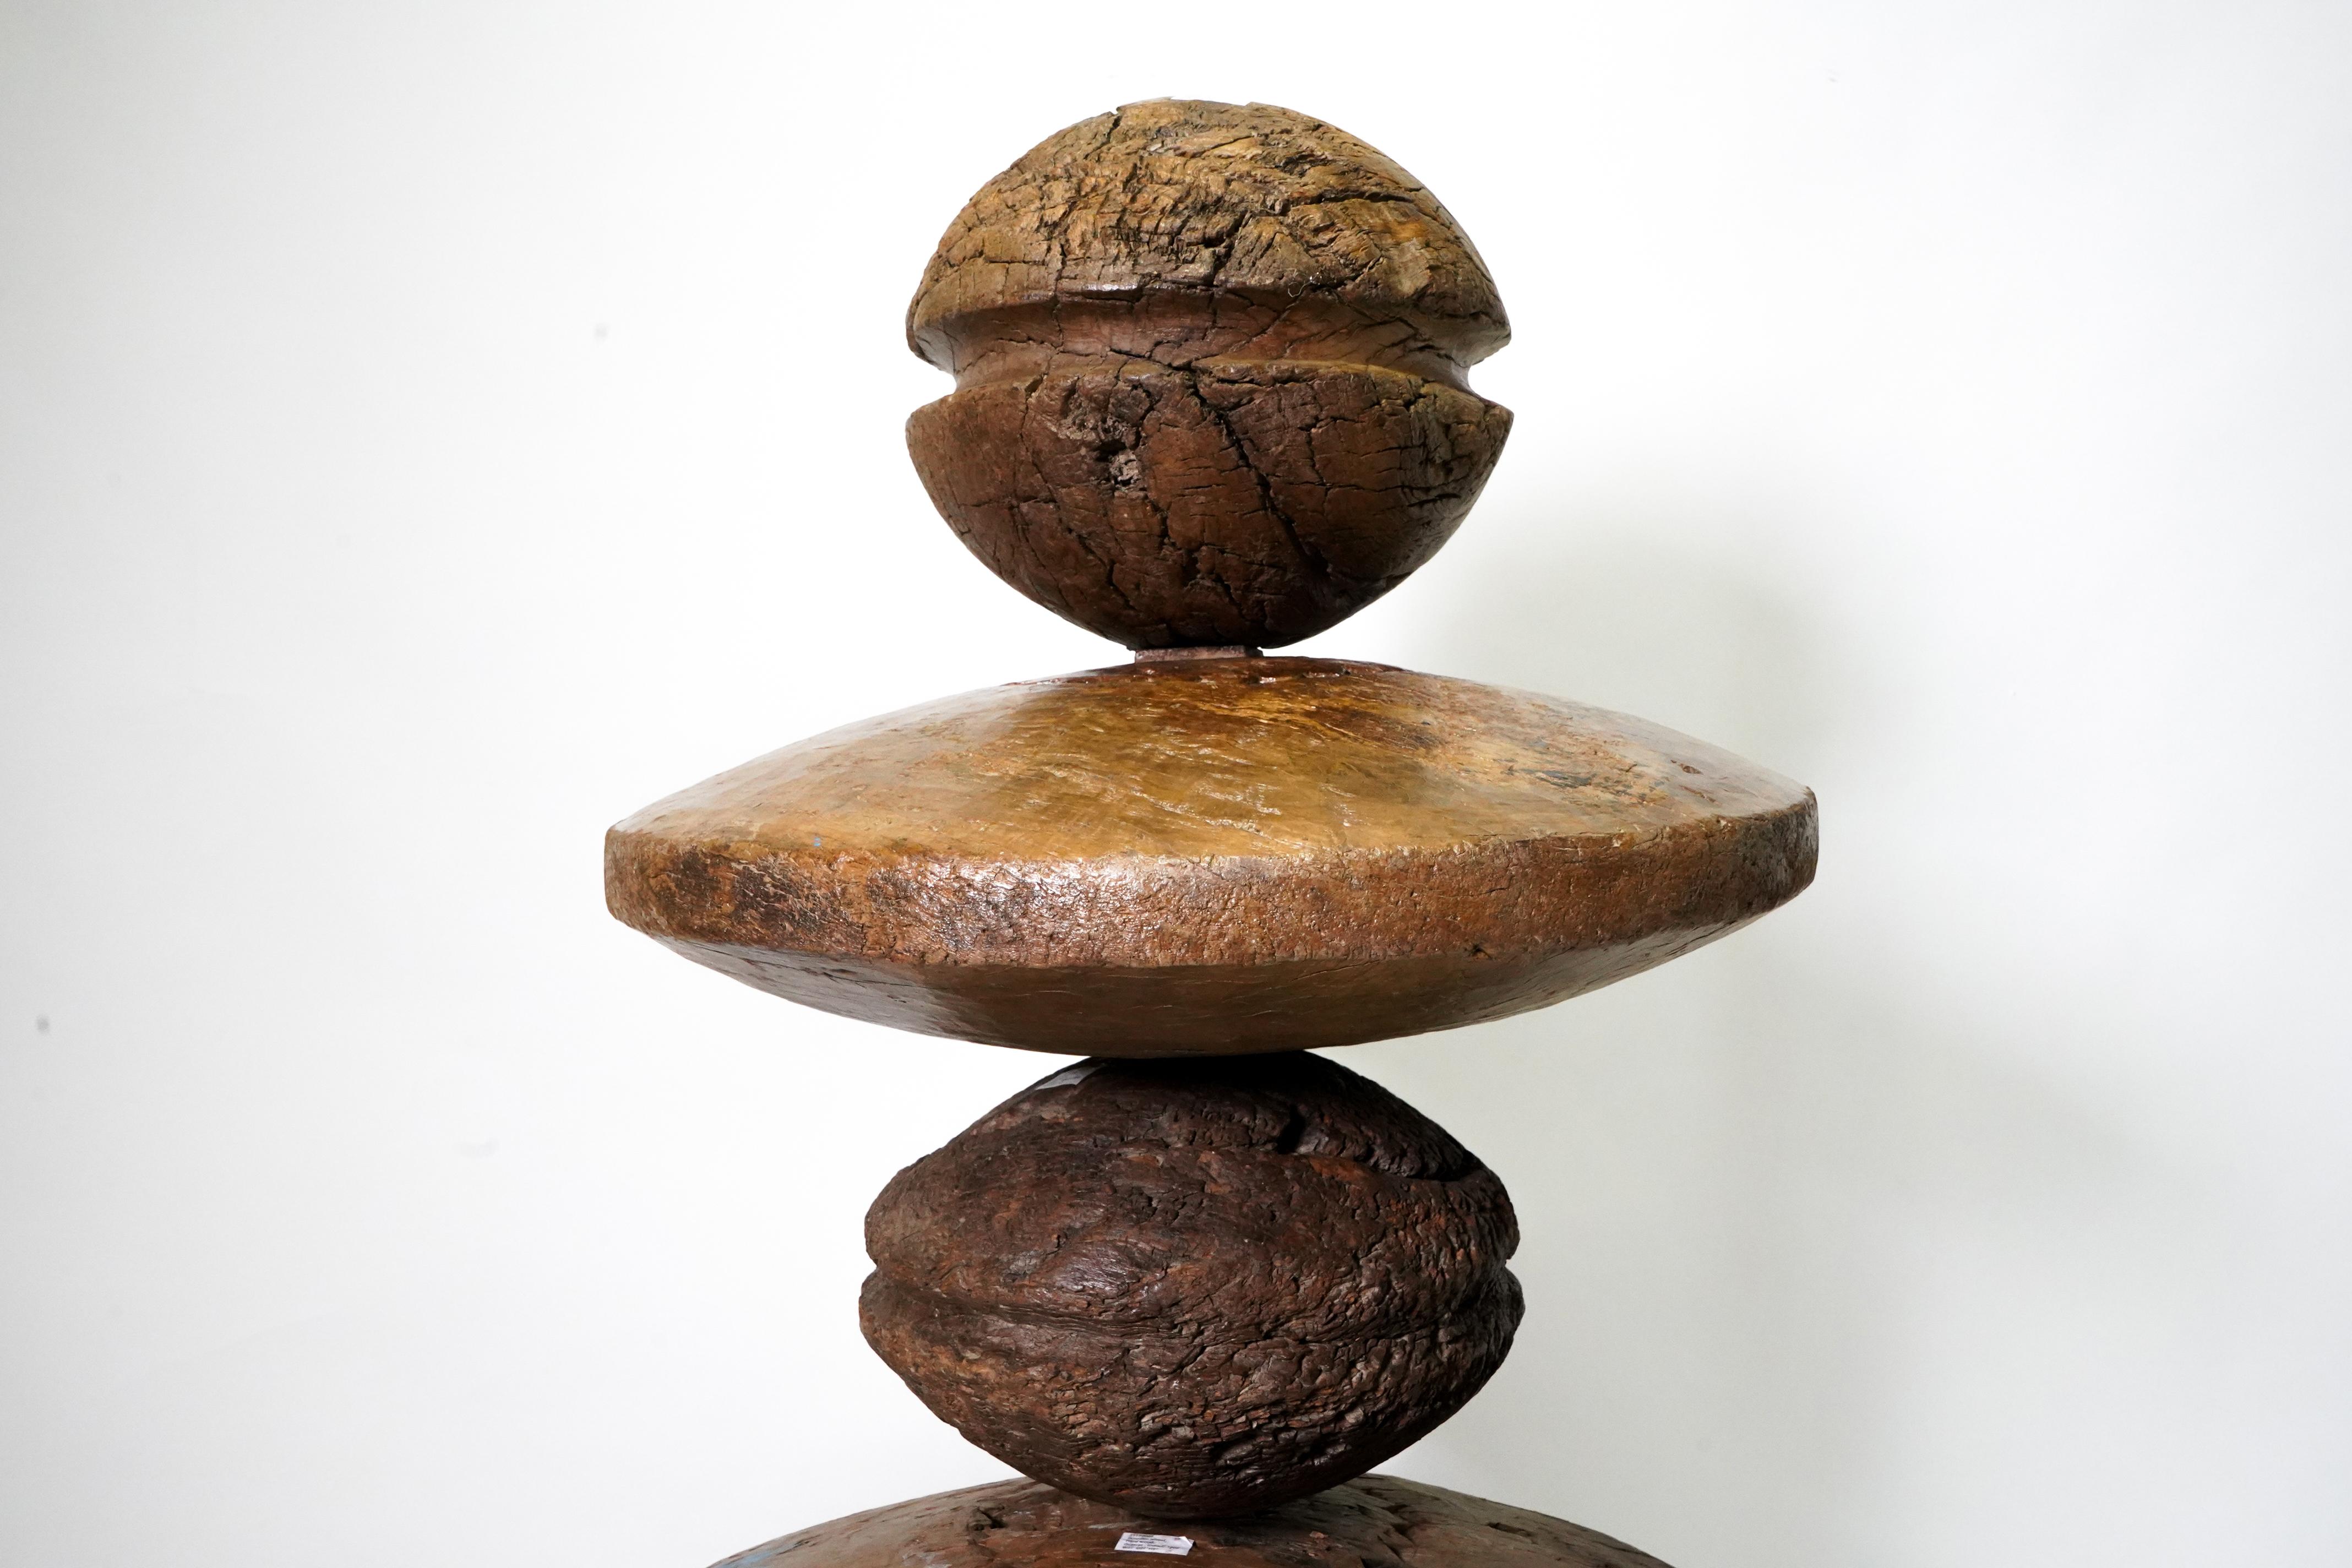 Indian Monumental Modern Sculpture Assembled From Ancient Wooden Wheels and Pulleys